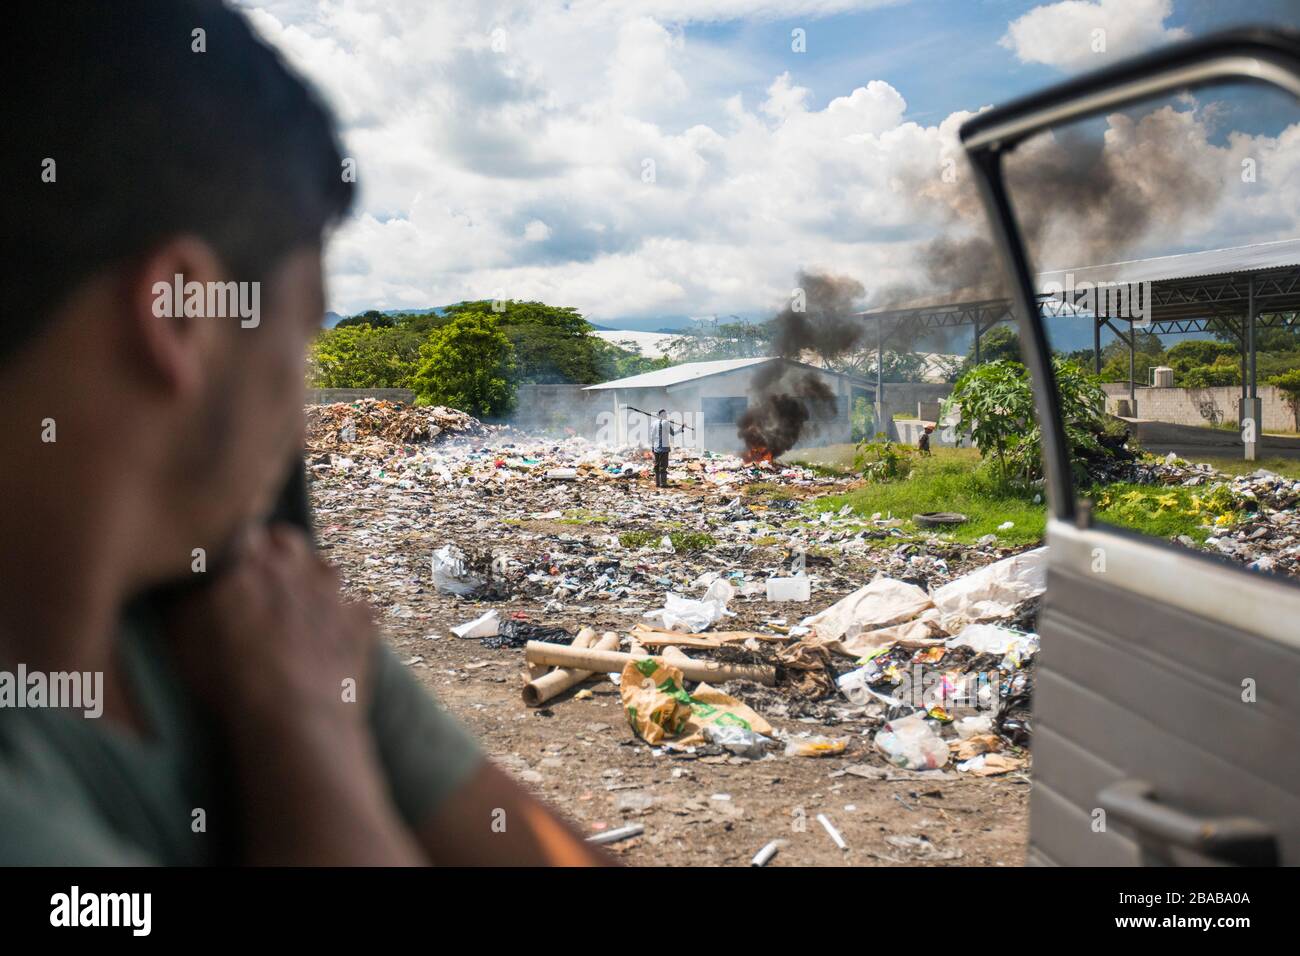 View from vehicle of worker at dump burning garbage. Stock Photo